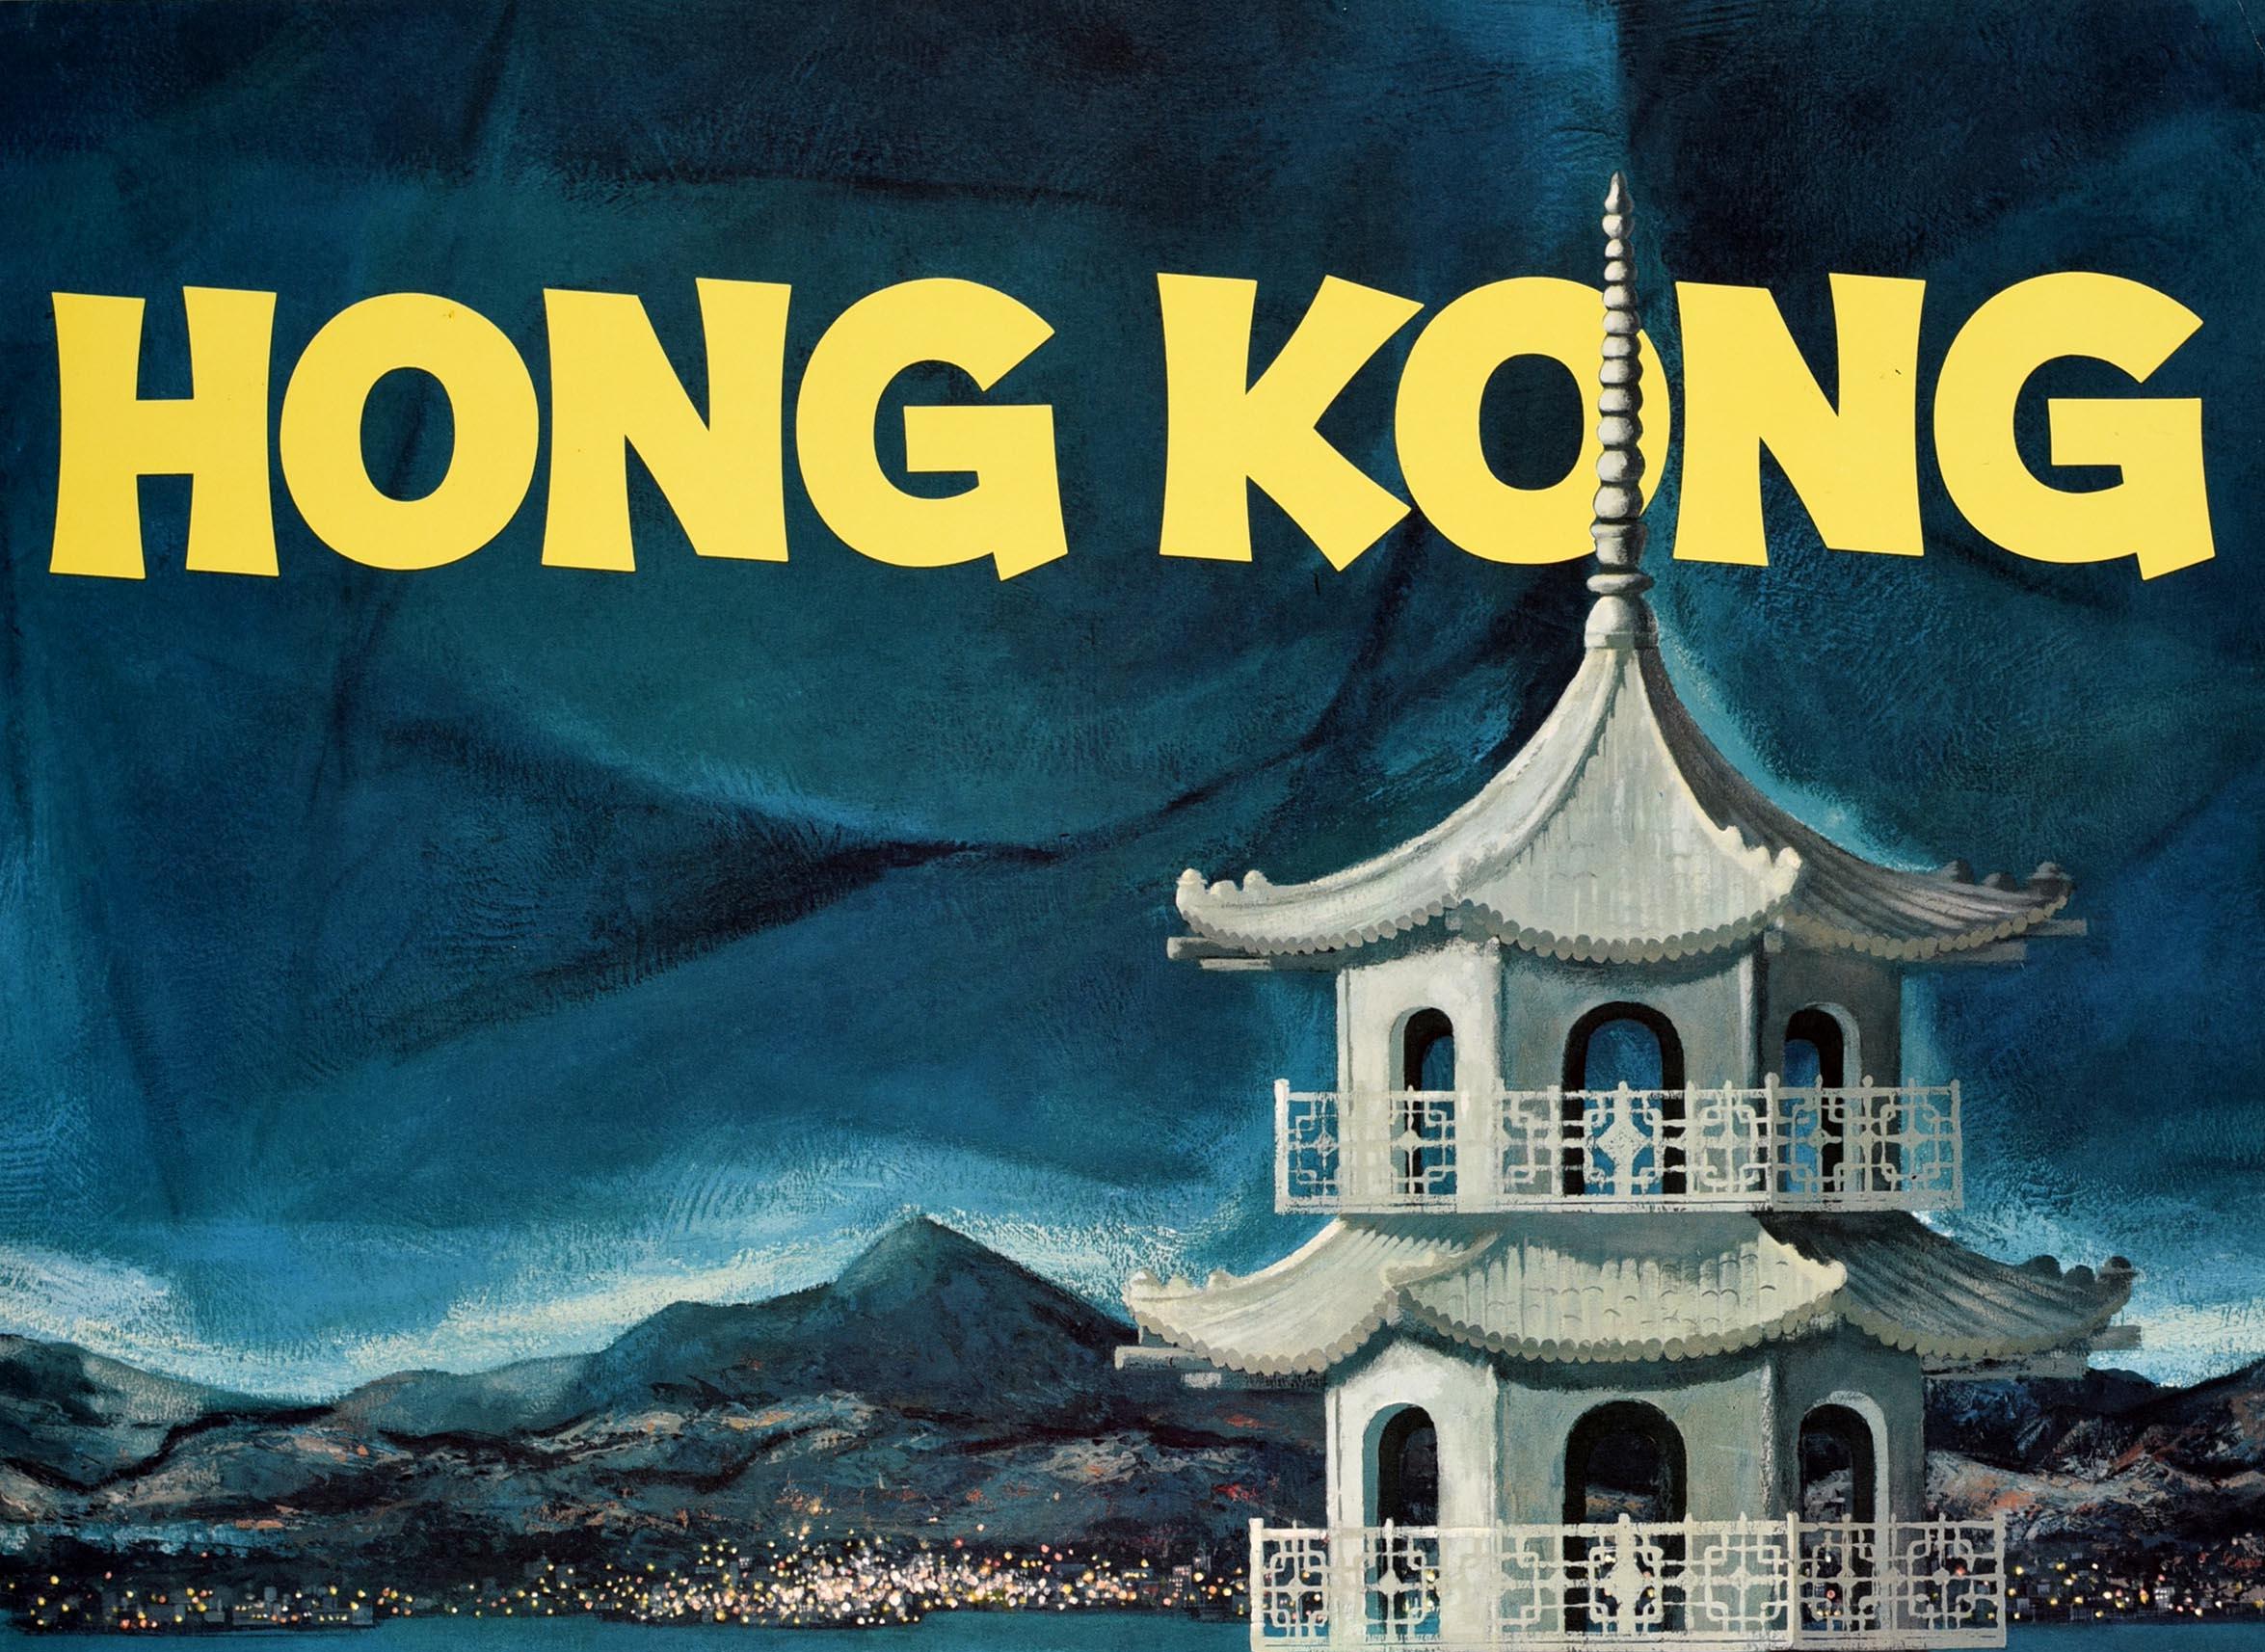 Original vintage Asia travel poster for Hong Kong issued by American President Lines serving 50 ports on 4 major trade routes. Scenic artwork featuring a view across Hong Kong harbour with a cruise liner ship sailing next to traditional junk boats